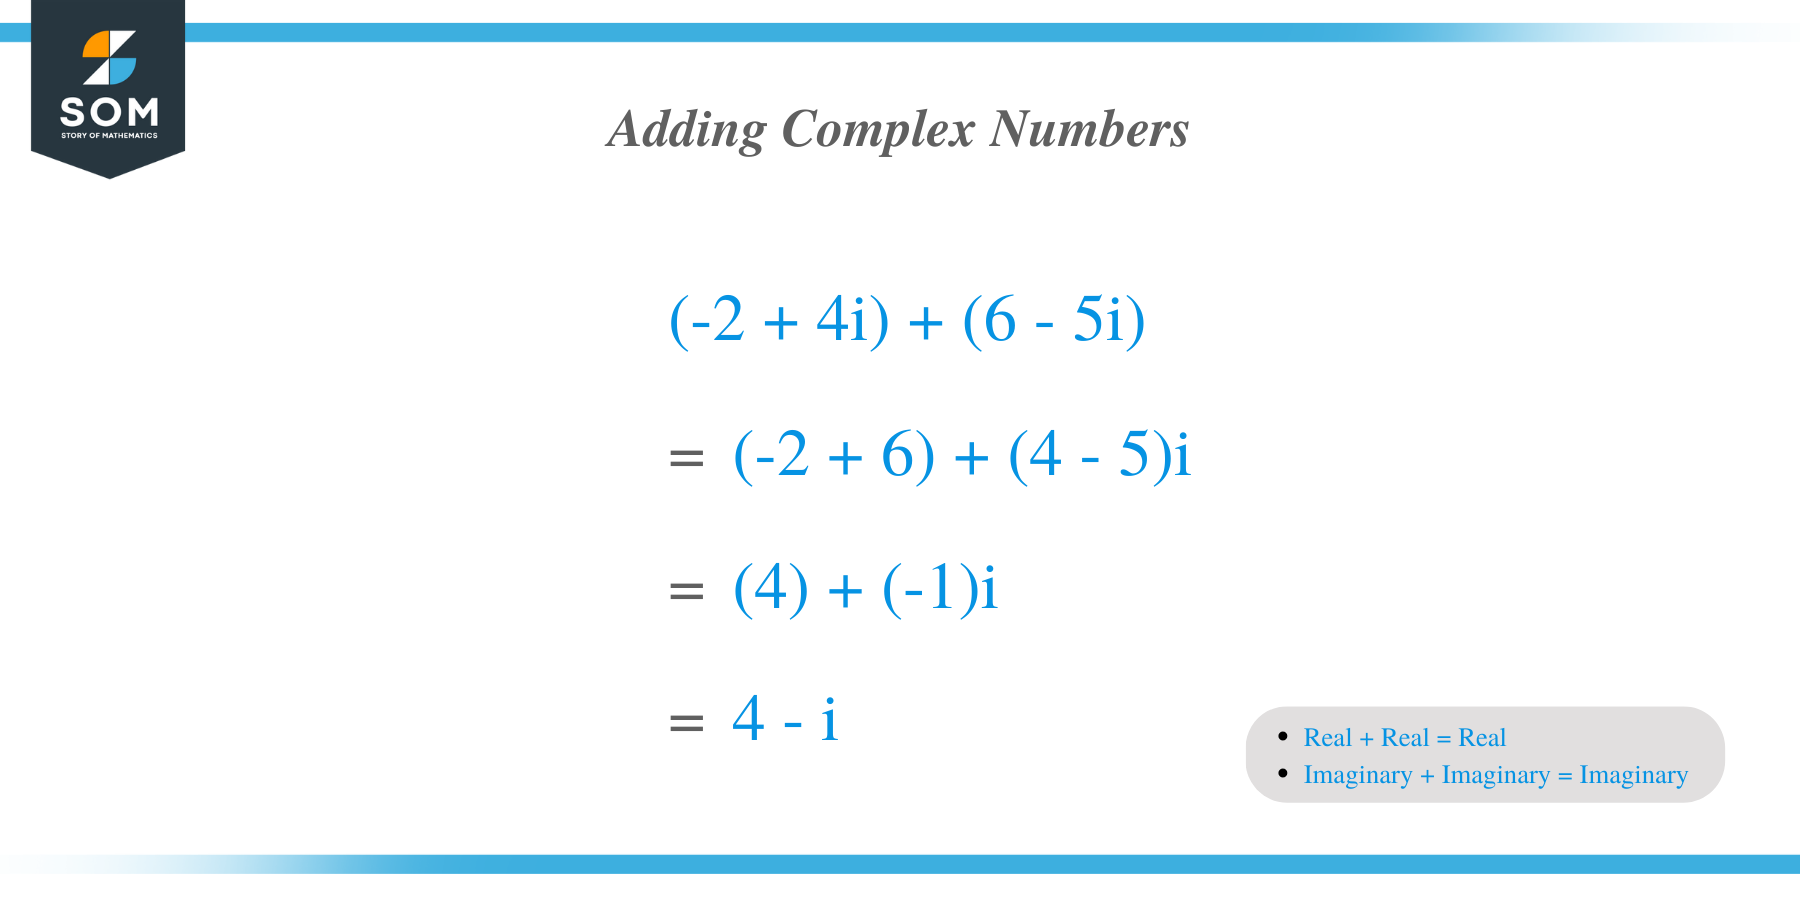 How to add complex numbers?